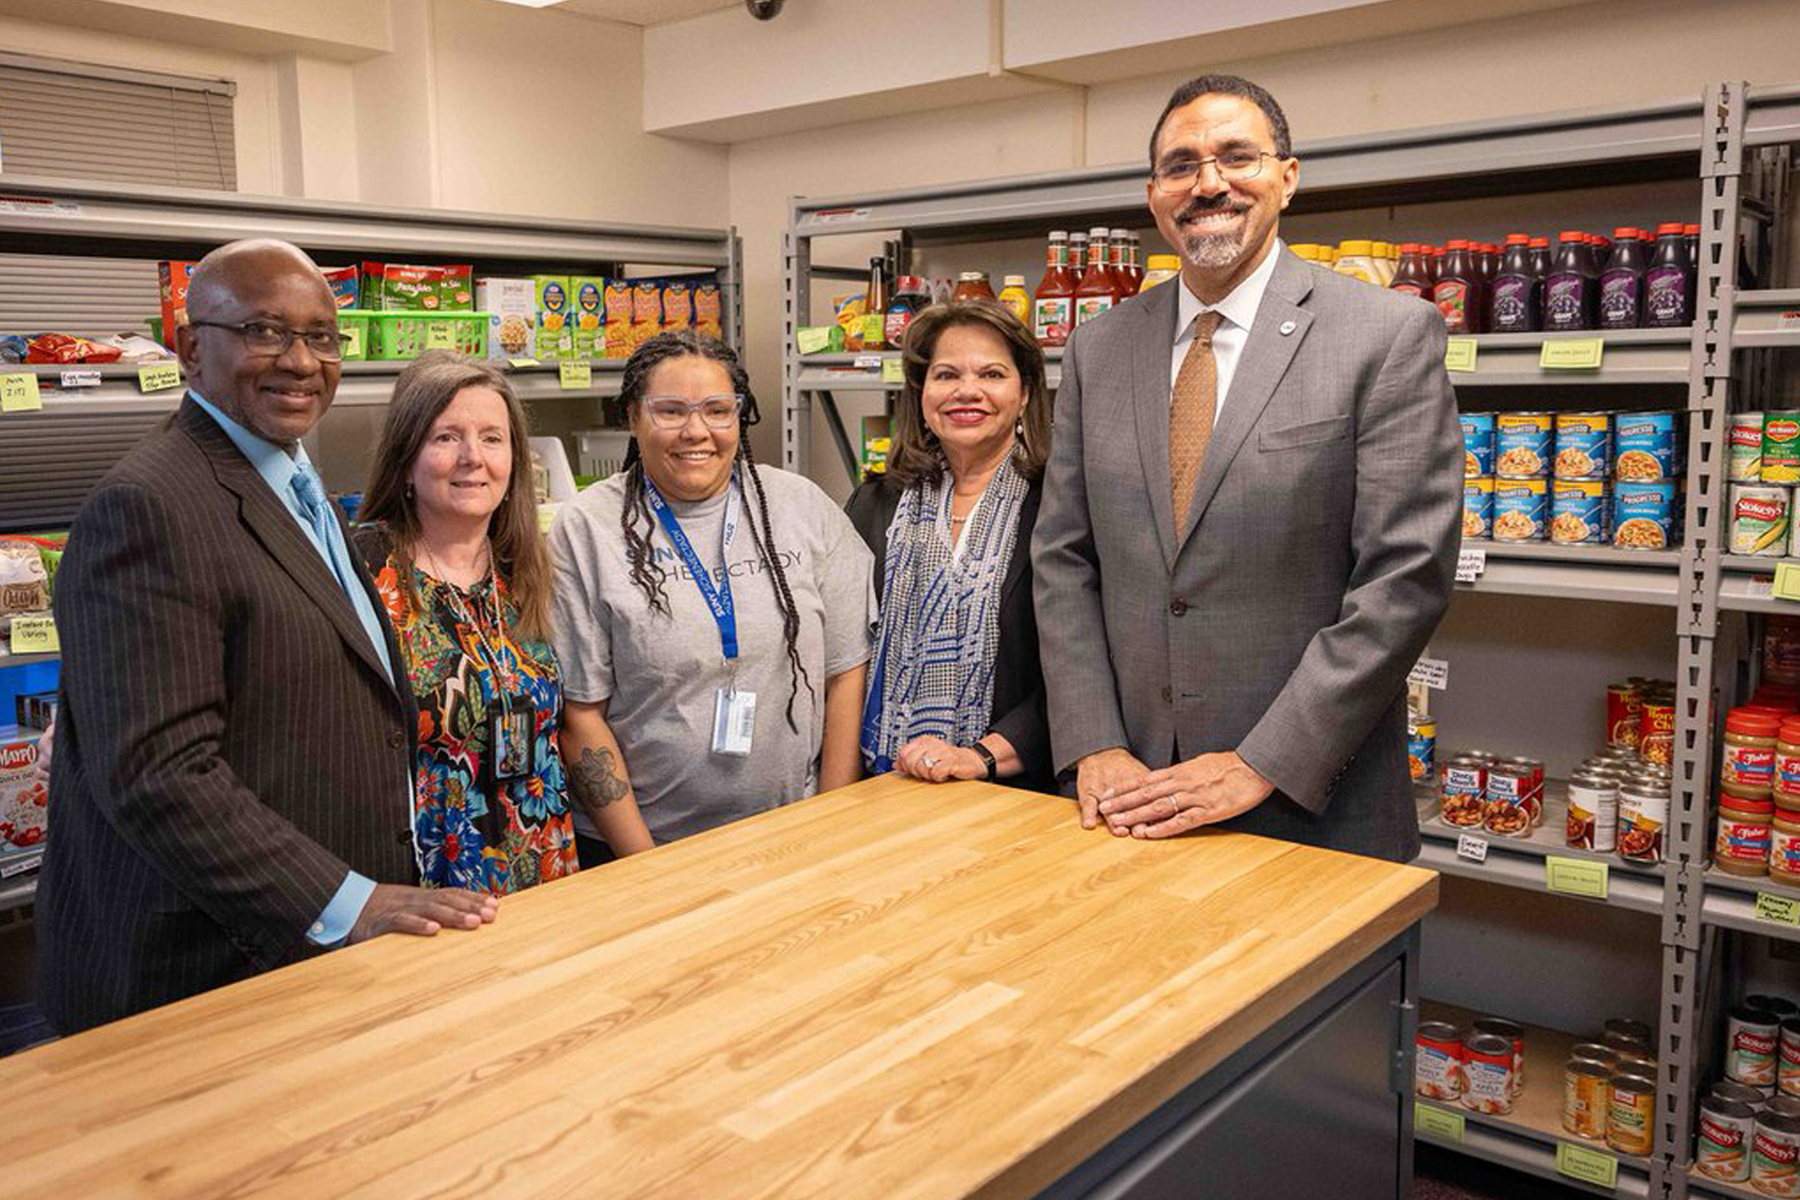 Chancellor King with President Moono, staff and students in Food Pantry